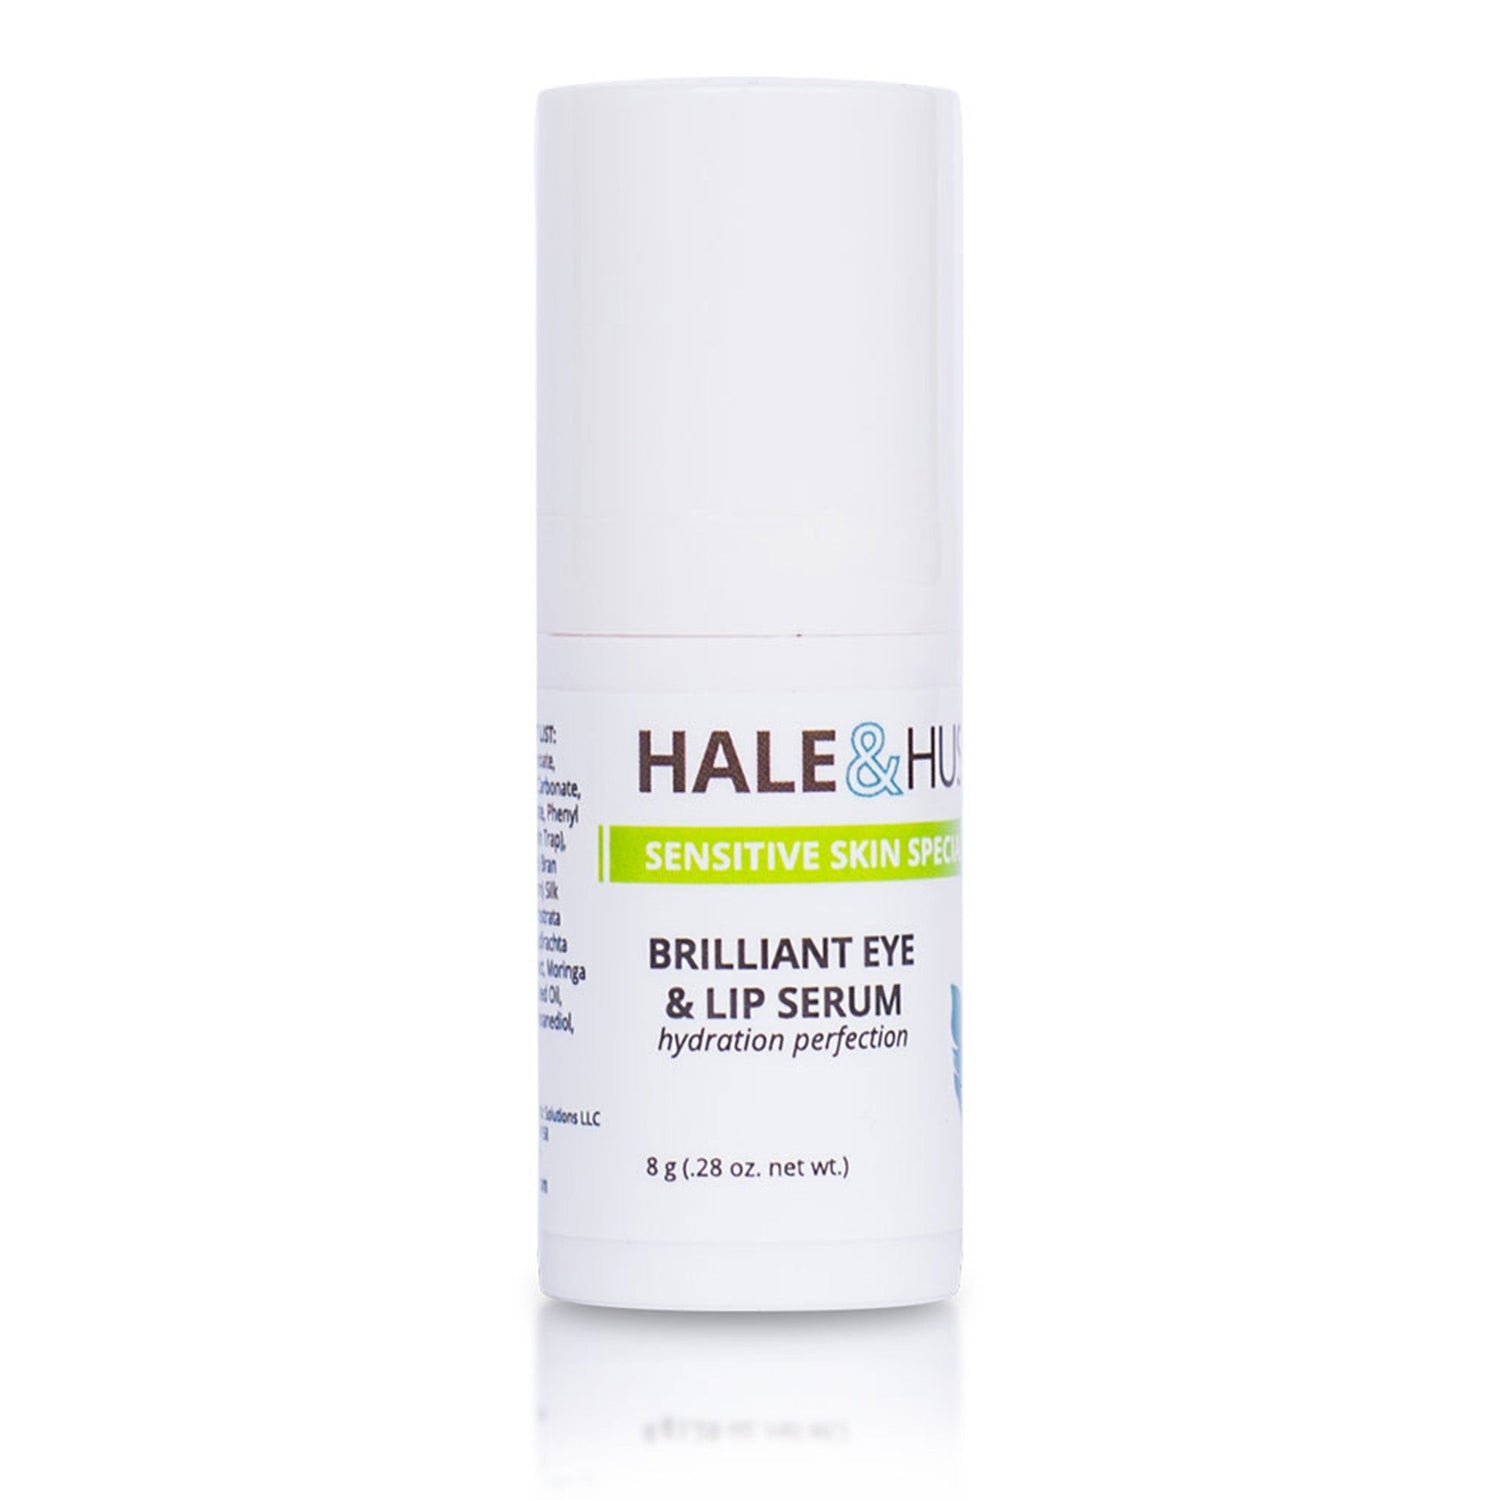 Brilliant Eye &amp; Lip Serum softens and conditions skin around the eyes and lips